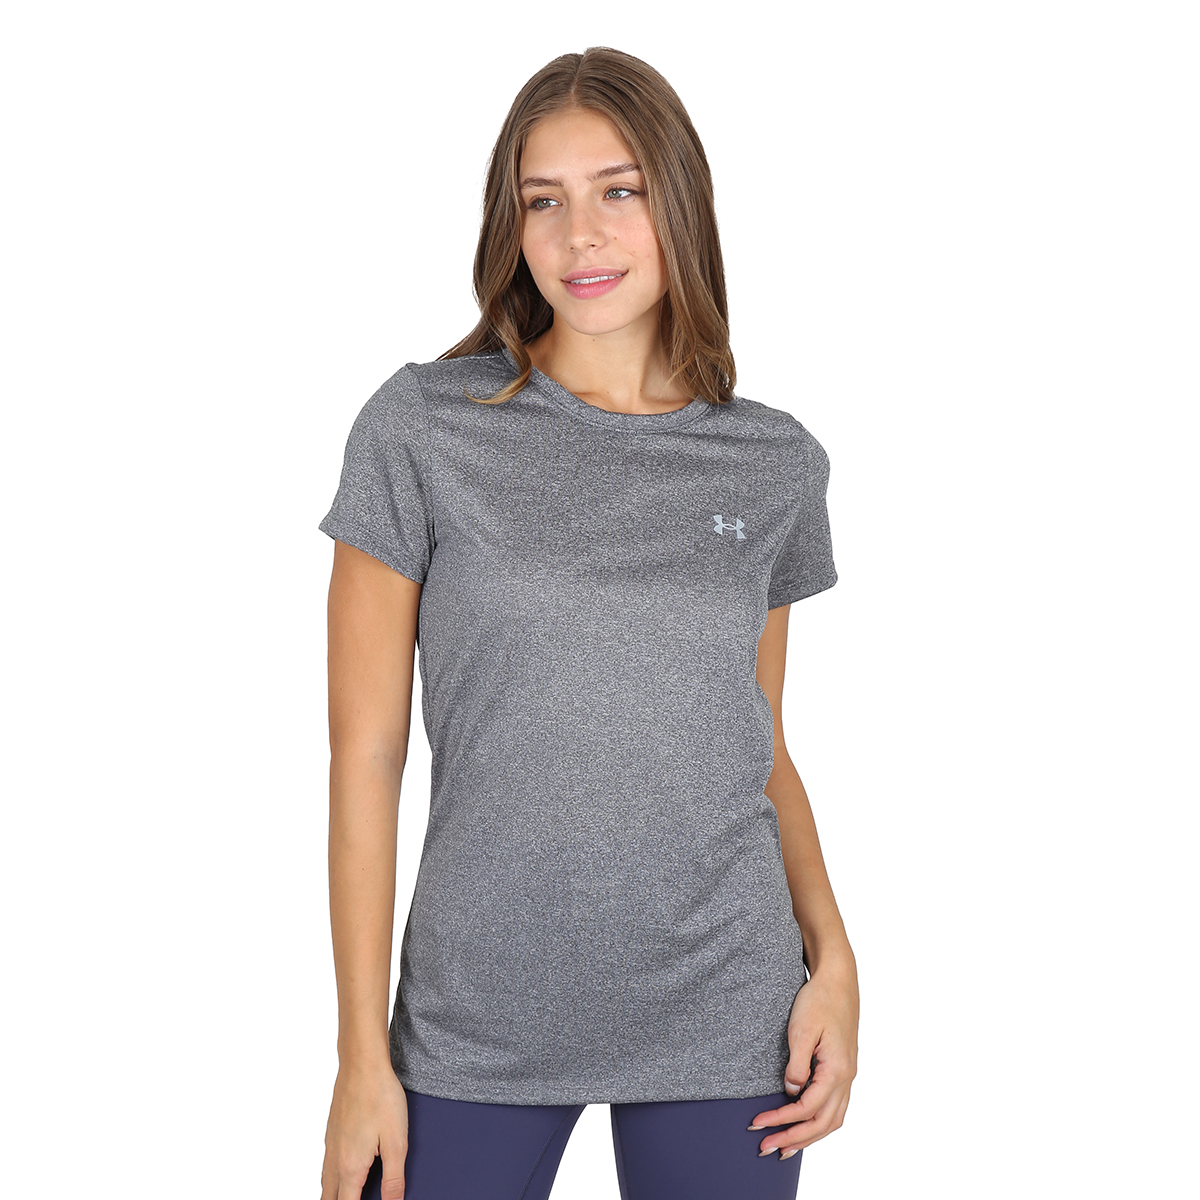 Remera Entrenamiento Under Armour Tech Ssc Mujer